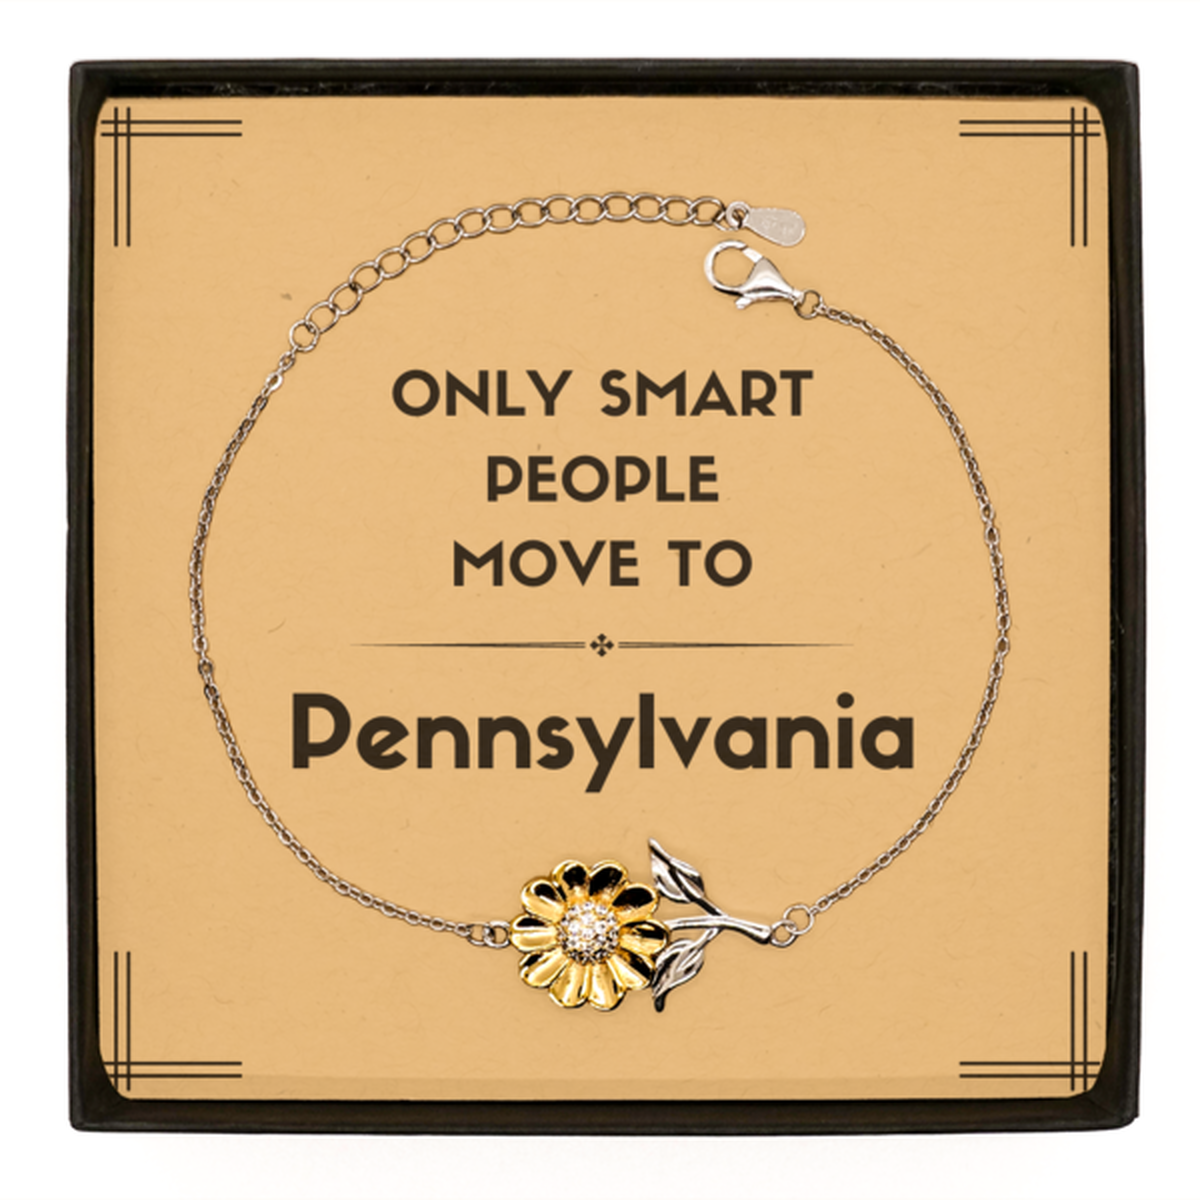 Only smart people move to Pennsylvania Sunflower Bracelet, Message Card Gifts For Pennsylvania, Move to Pennsylvania Gifts for Friends Coworker Funny Saying Quote